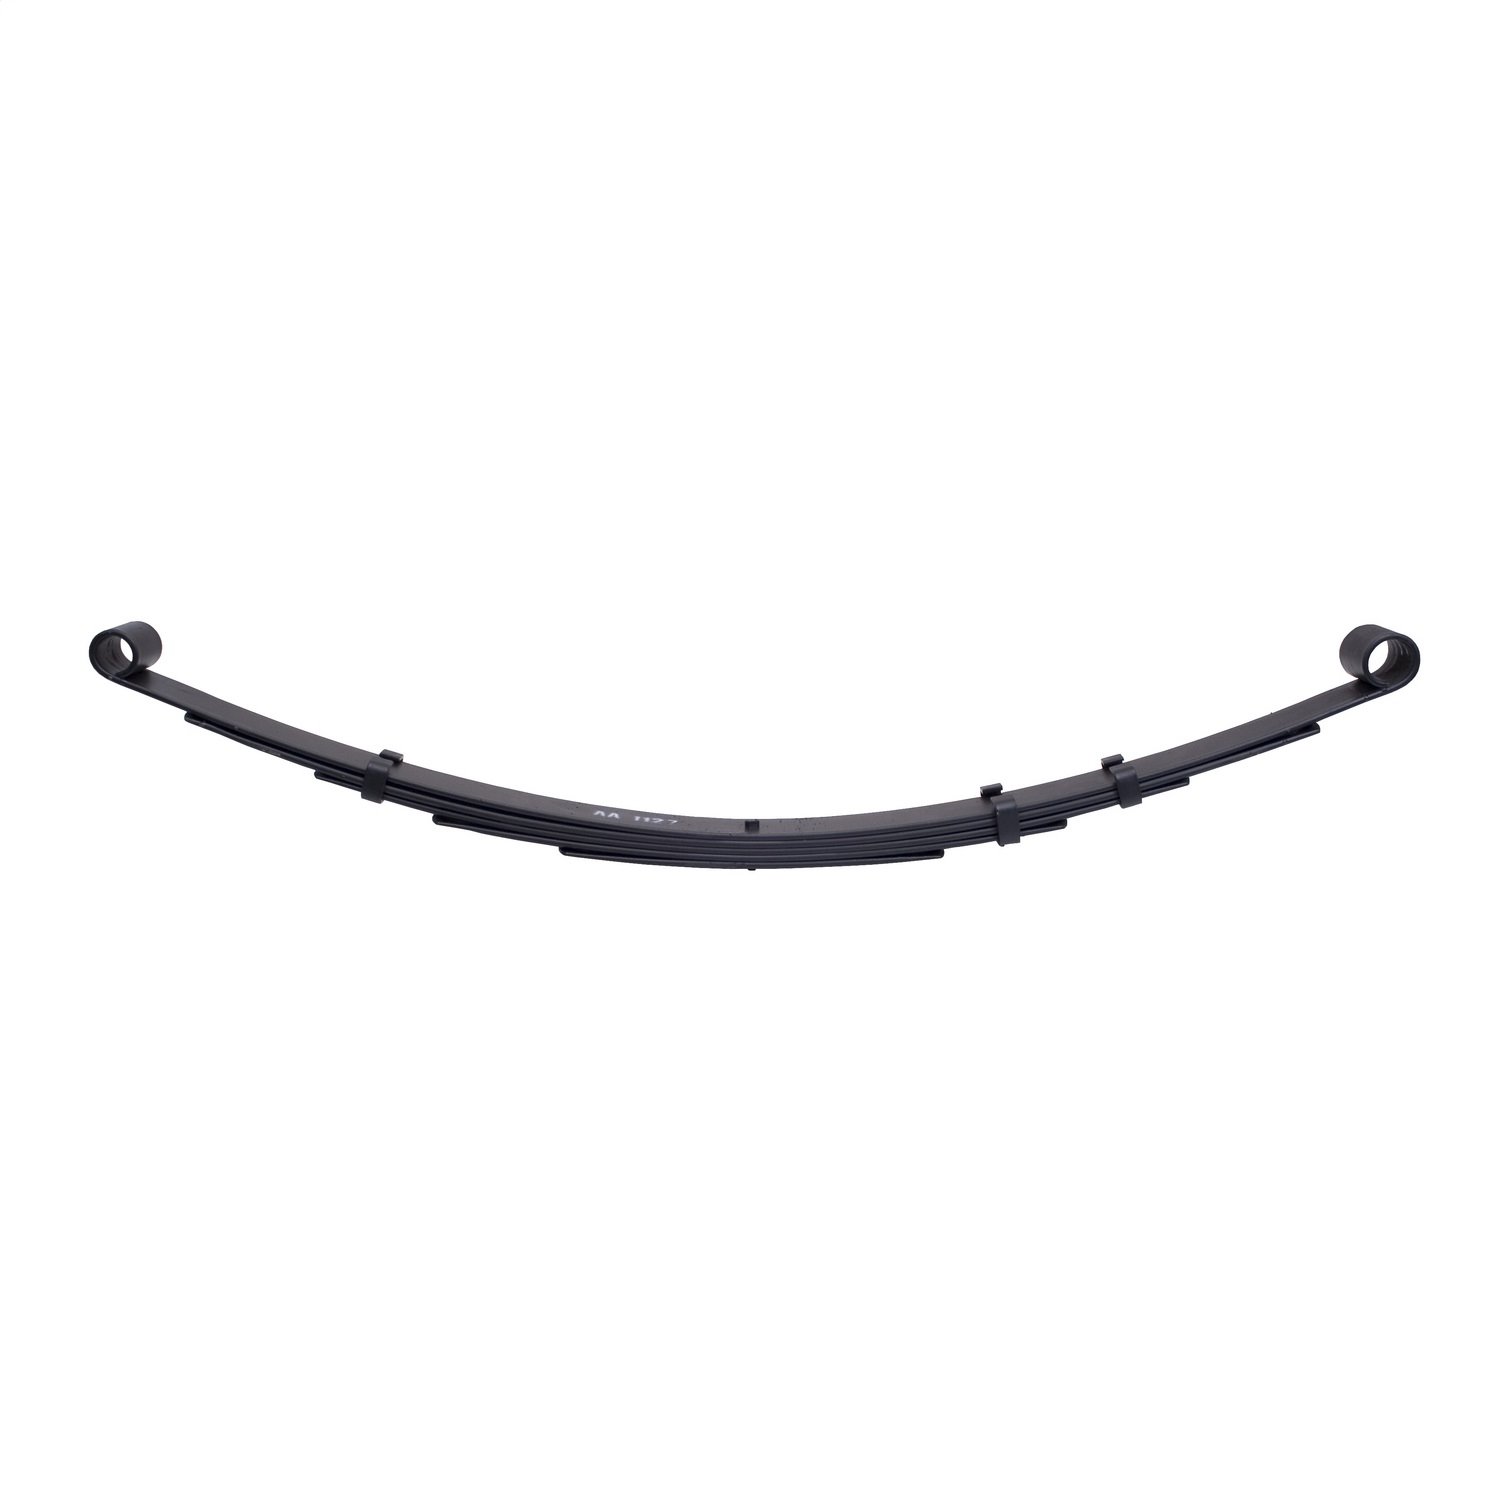 Stock replacement 5 leaf rear spring from Omix-ADA,